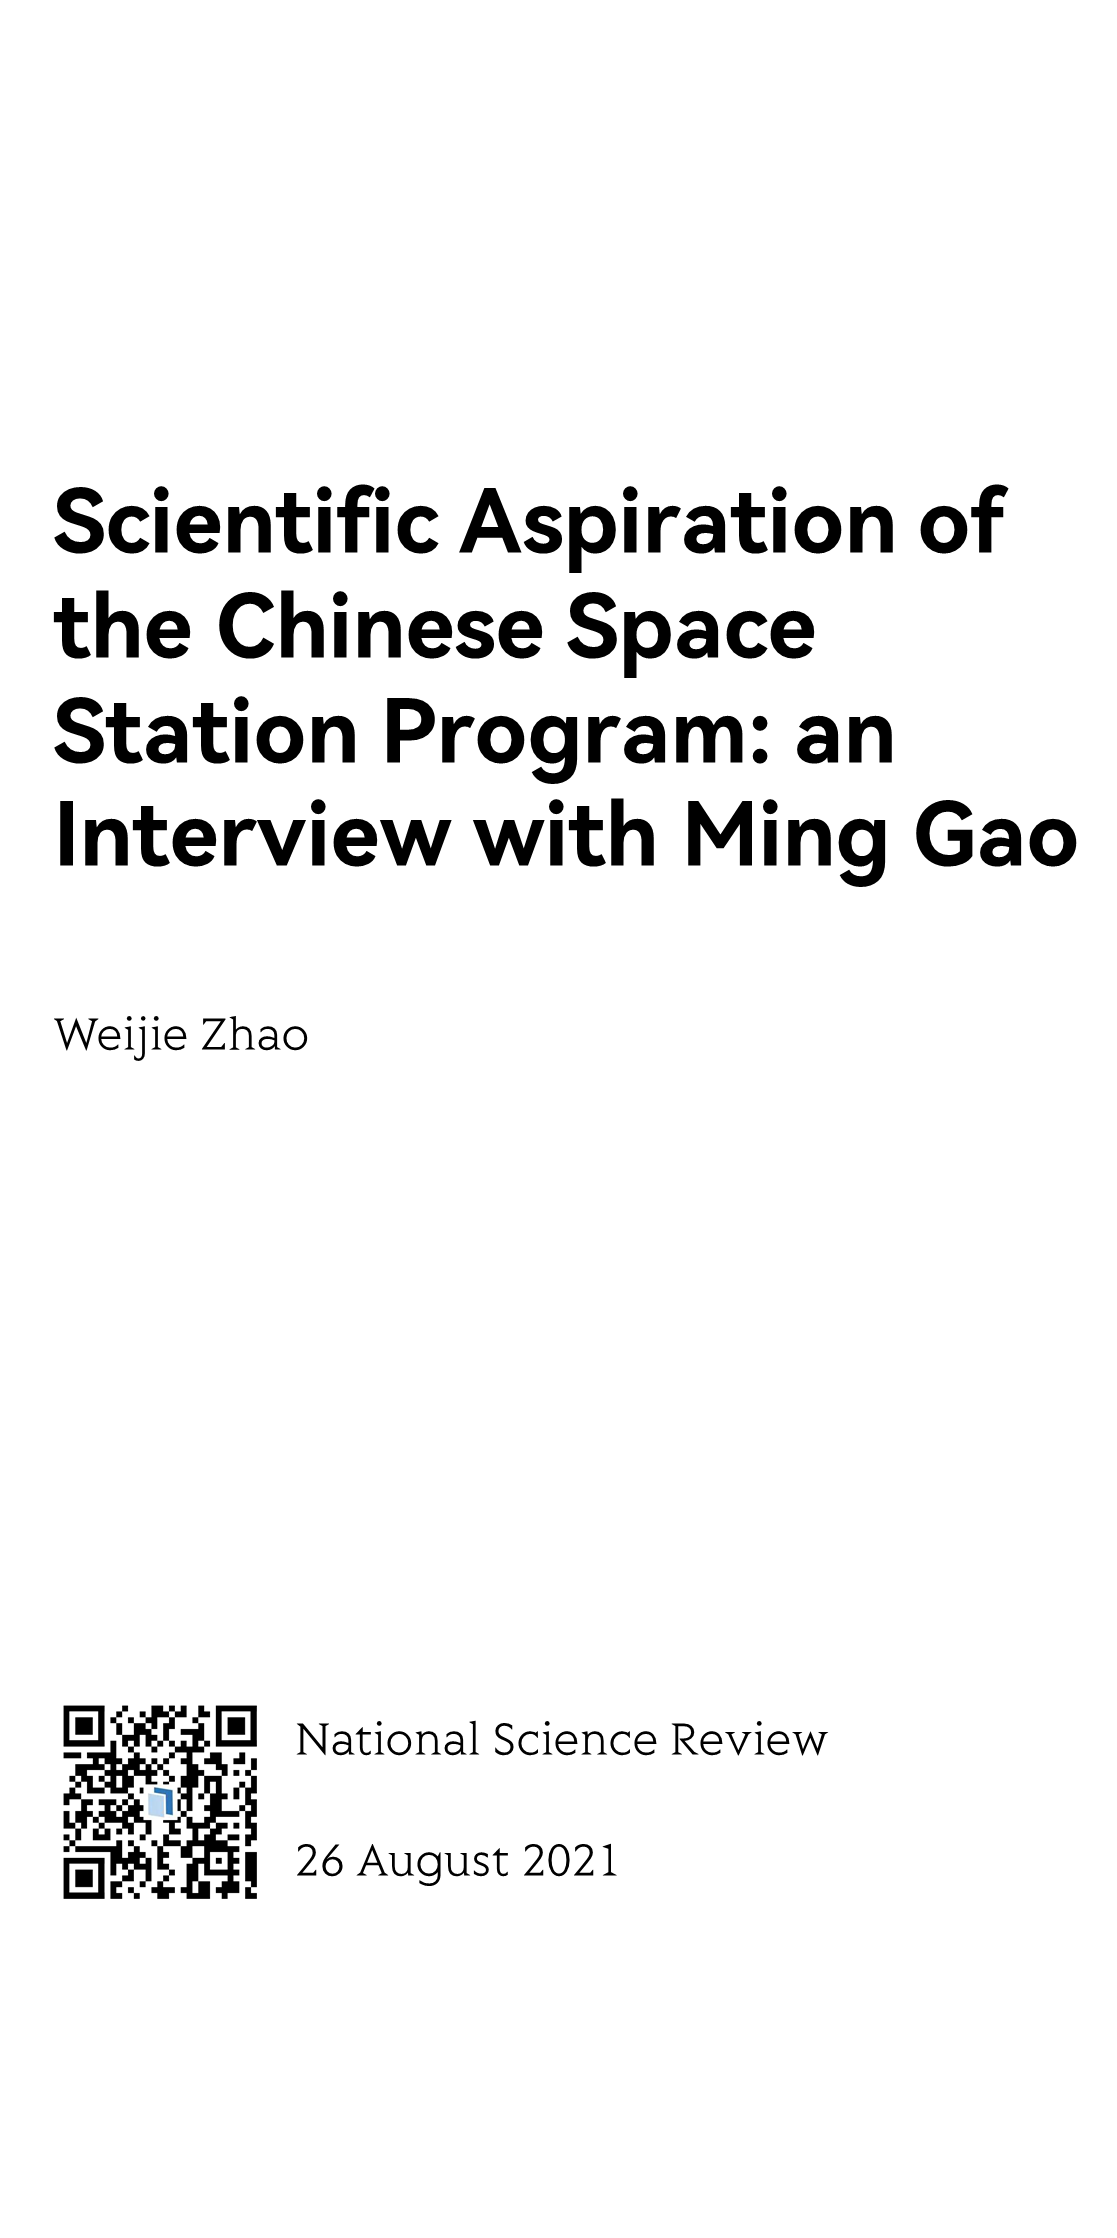 Scientific Aspiration of the Chinese Space Station Program: an Interview with Ming Gao_1